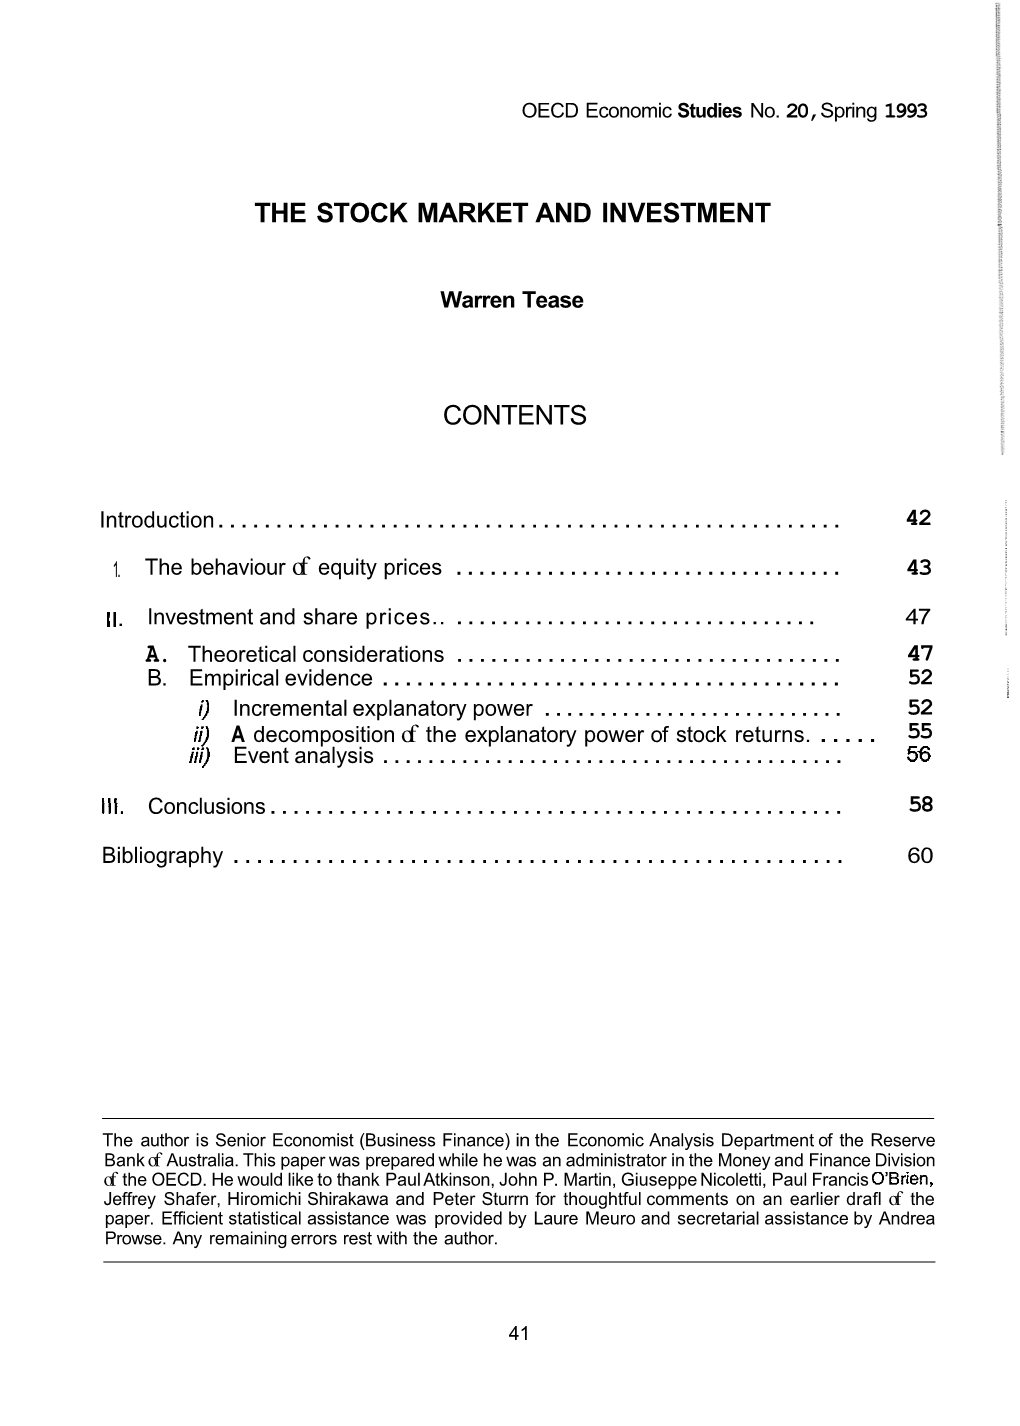 The Stock Market and Investment